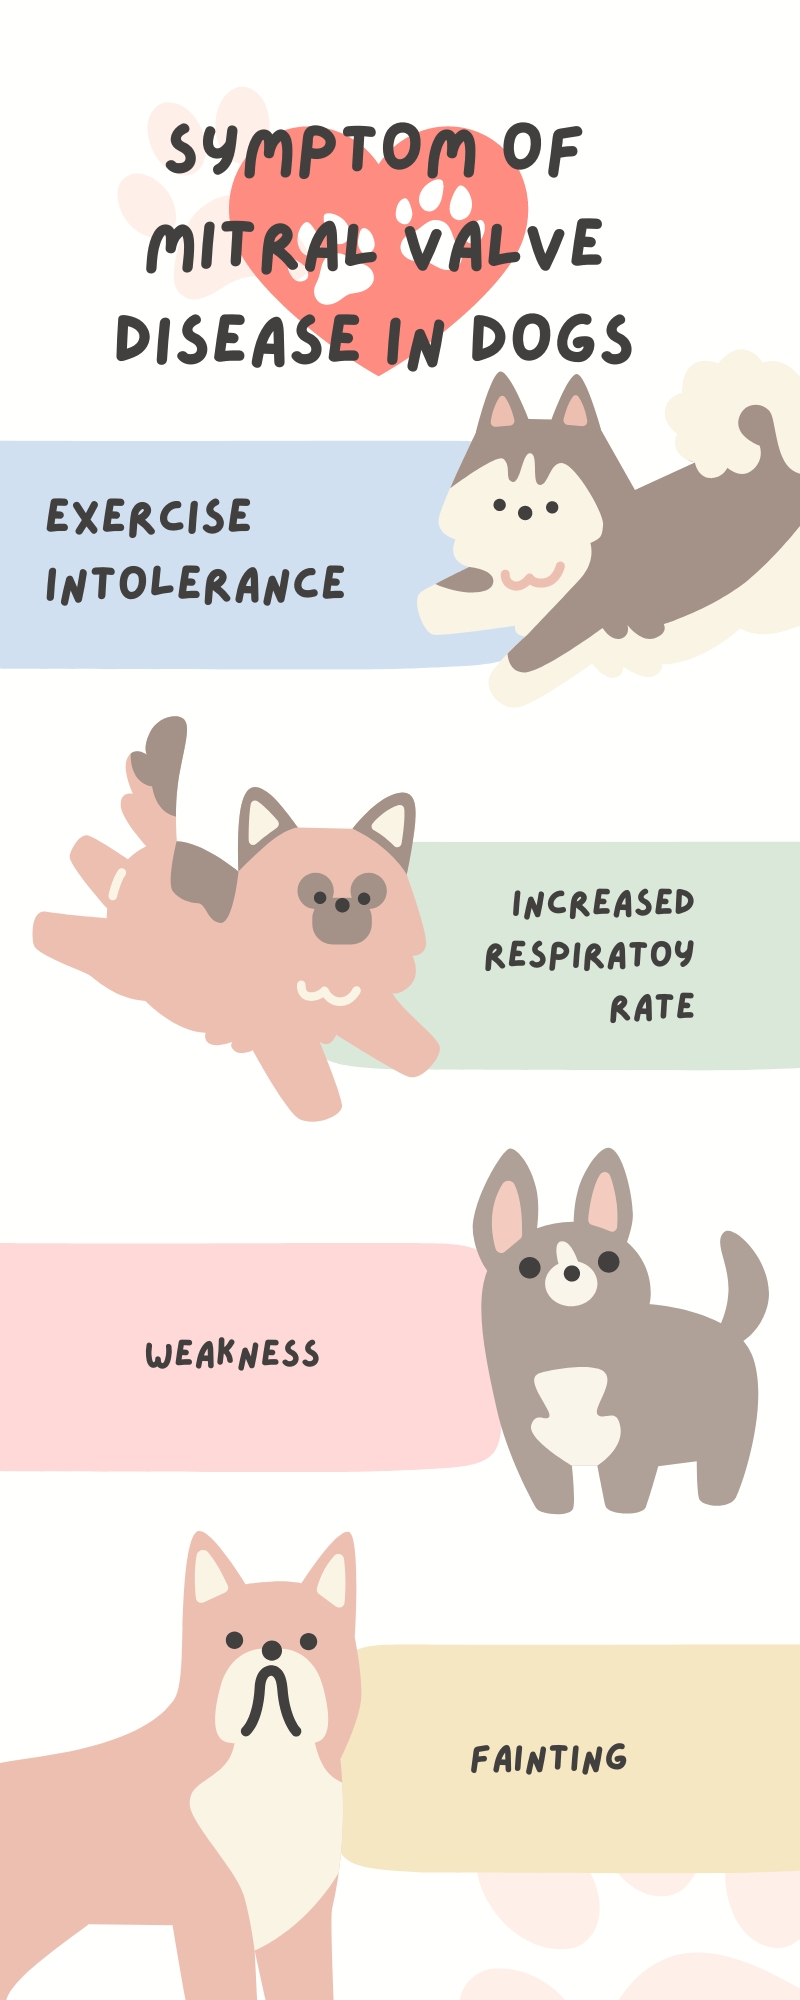 symptom of mitral valve disease in dogs infographic